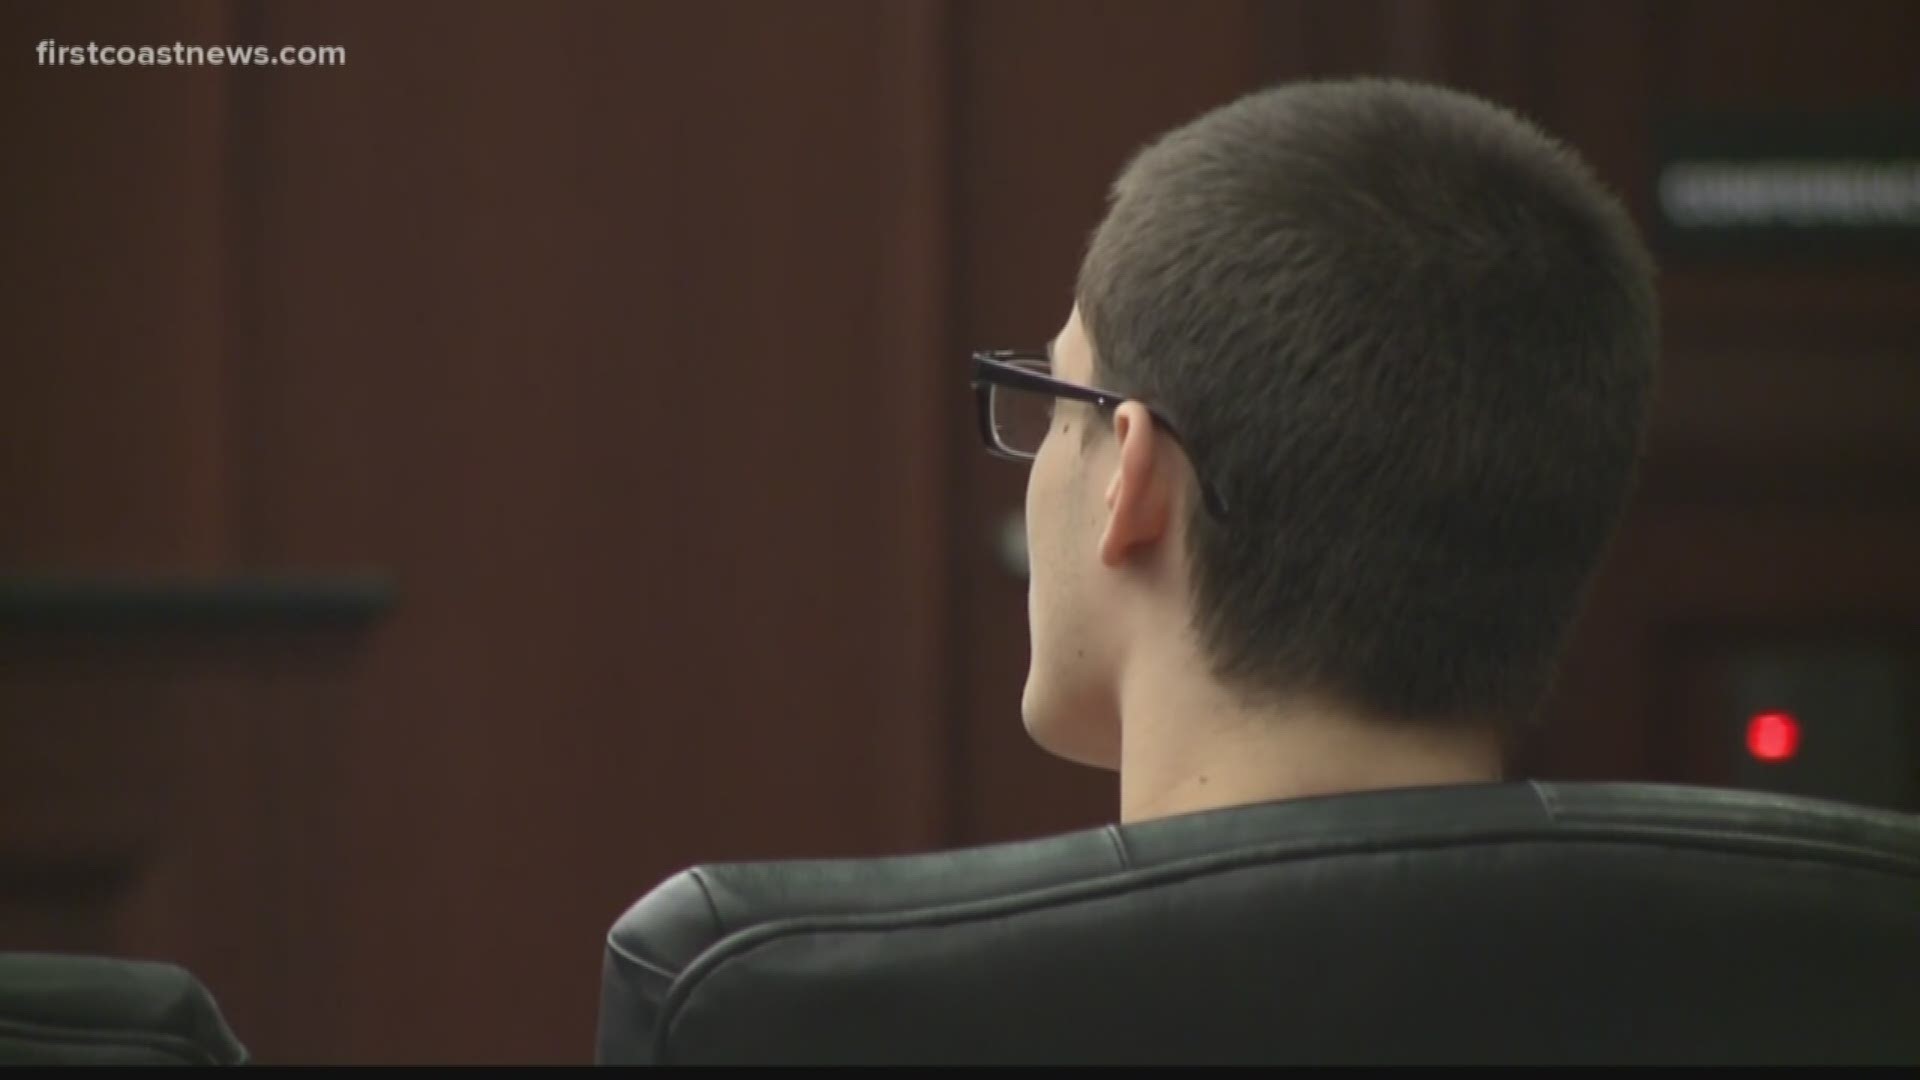 Logan Mott is back in court on Tuesday as the sentencing phase for him continues.